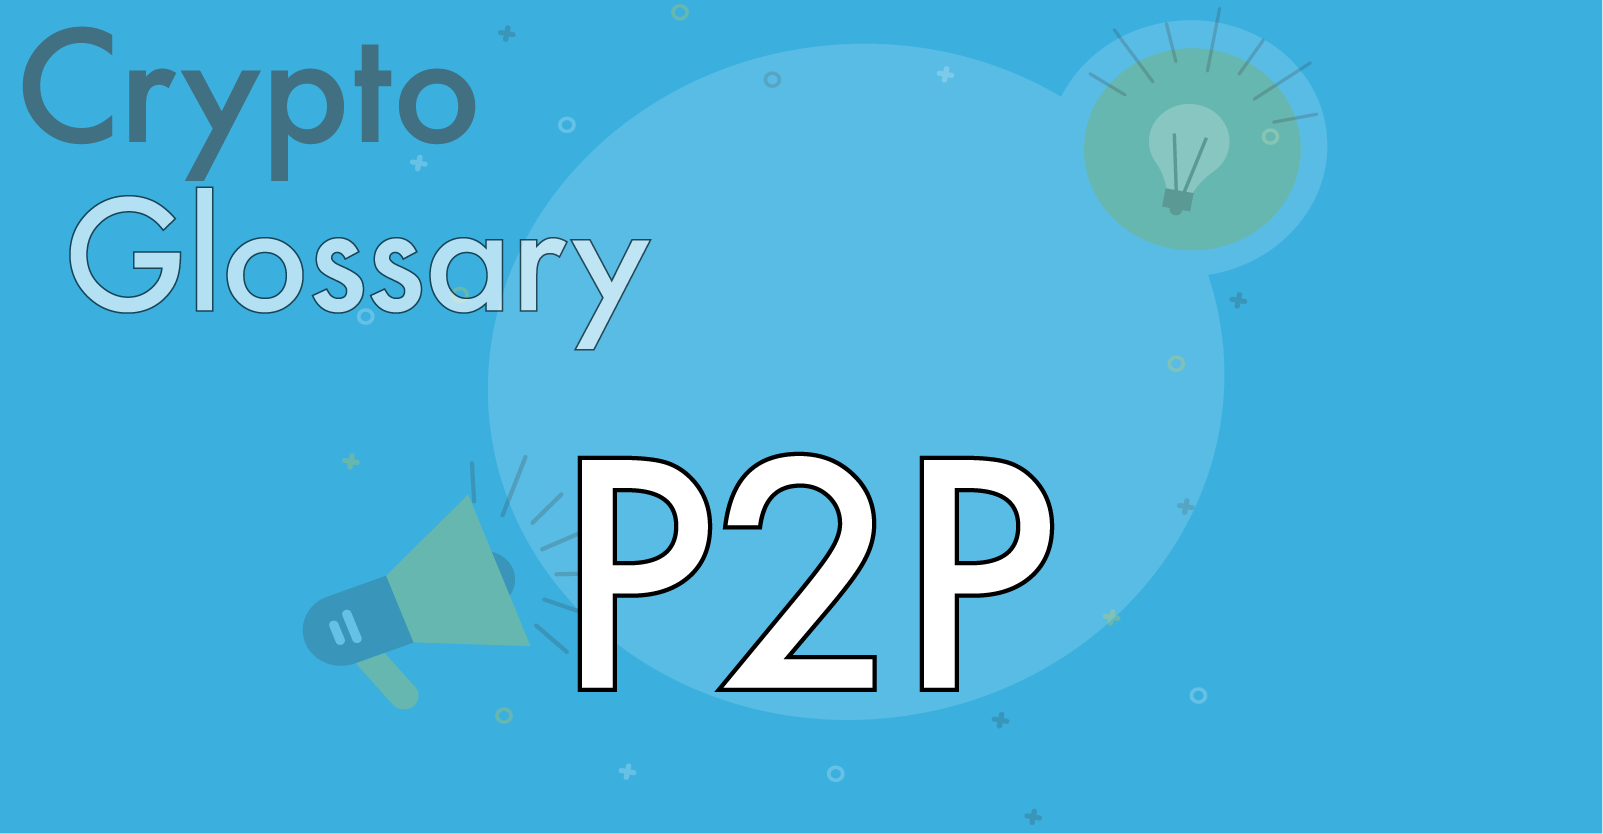 What is P2P and how does the term relate to Bitcoin?